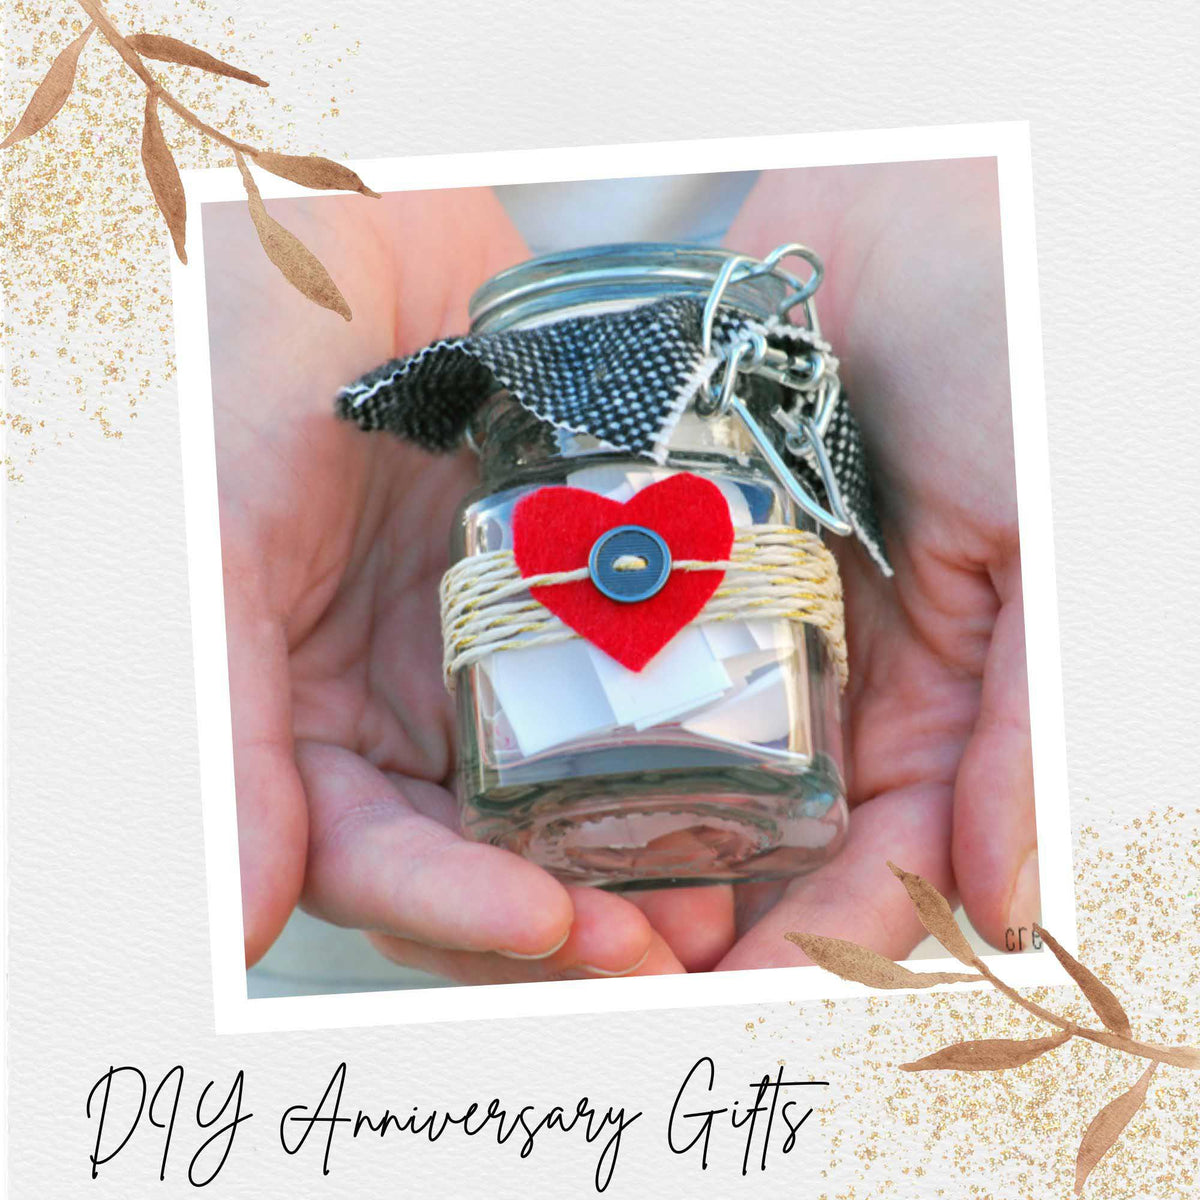 Creative 10th Wedding Anniversary Gifts for Him